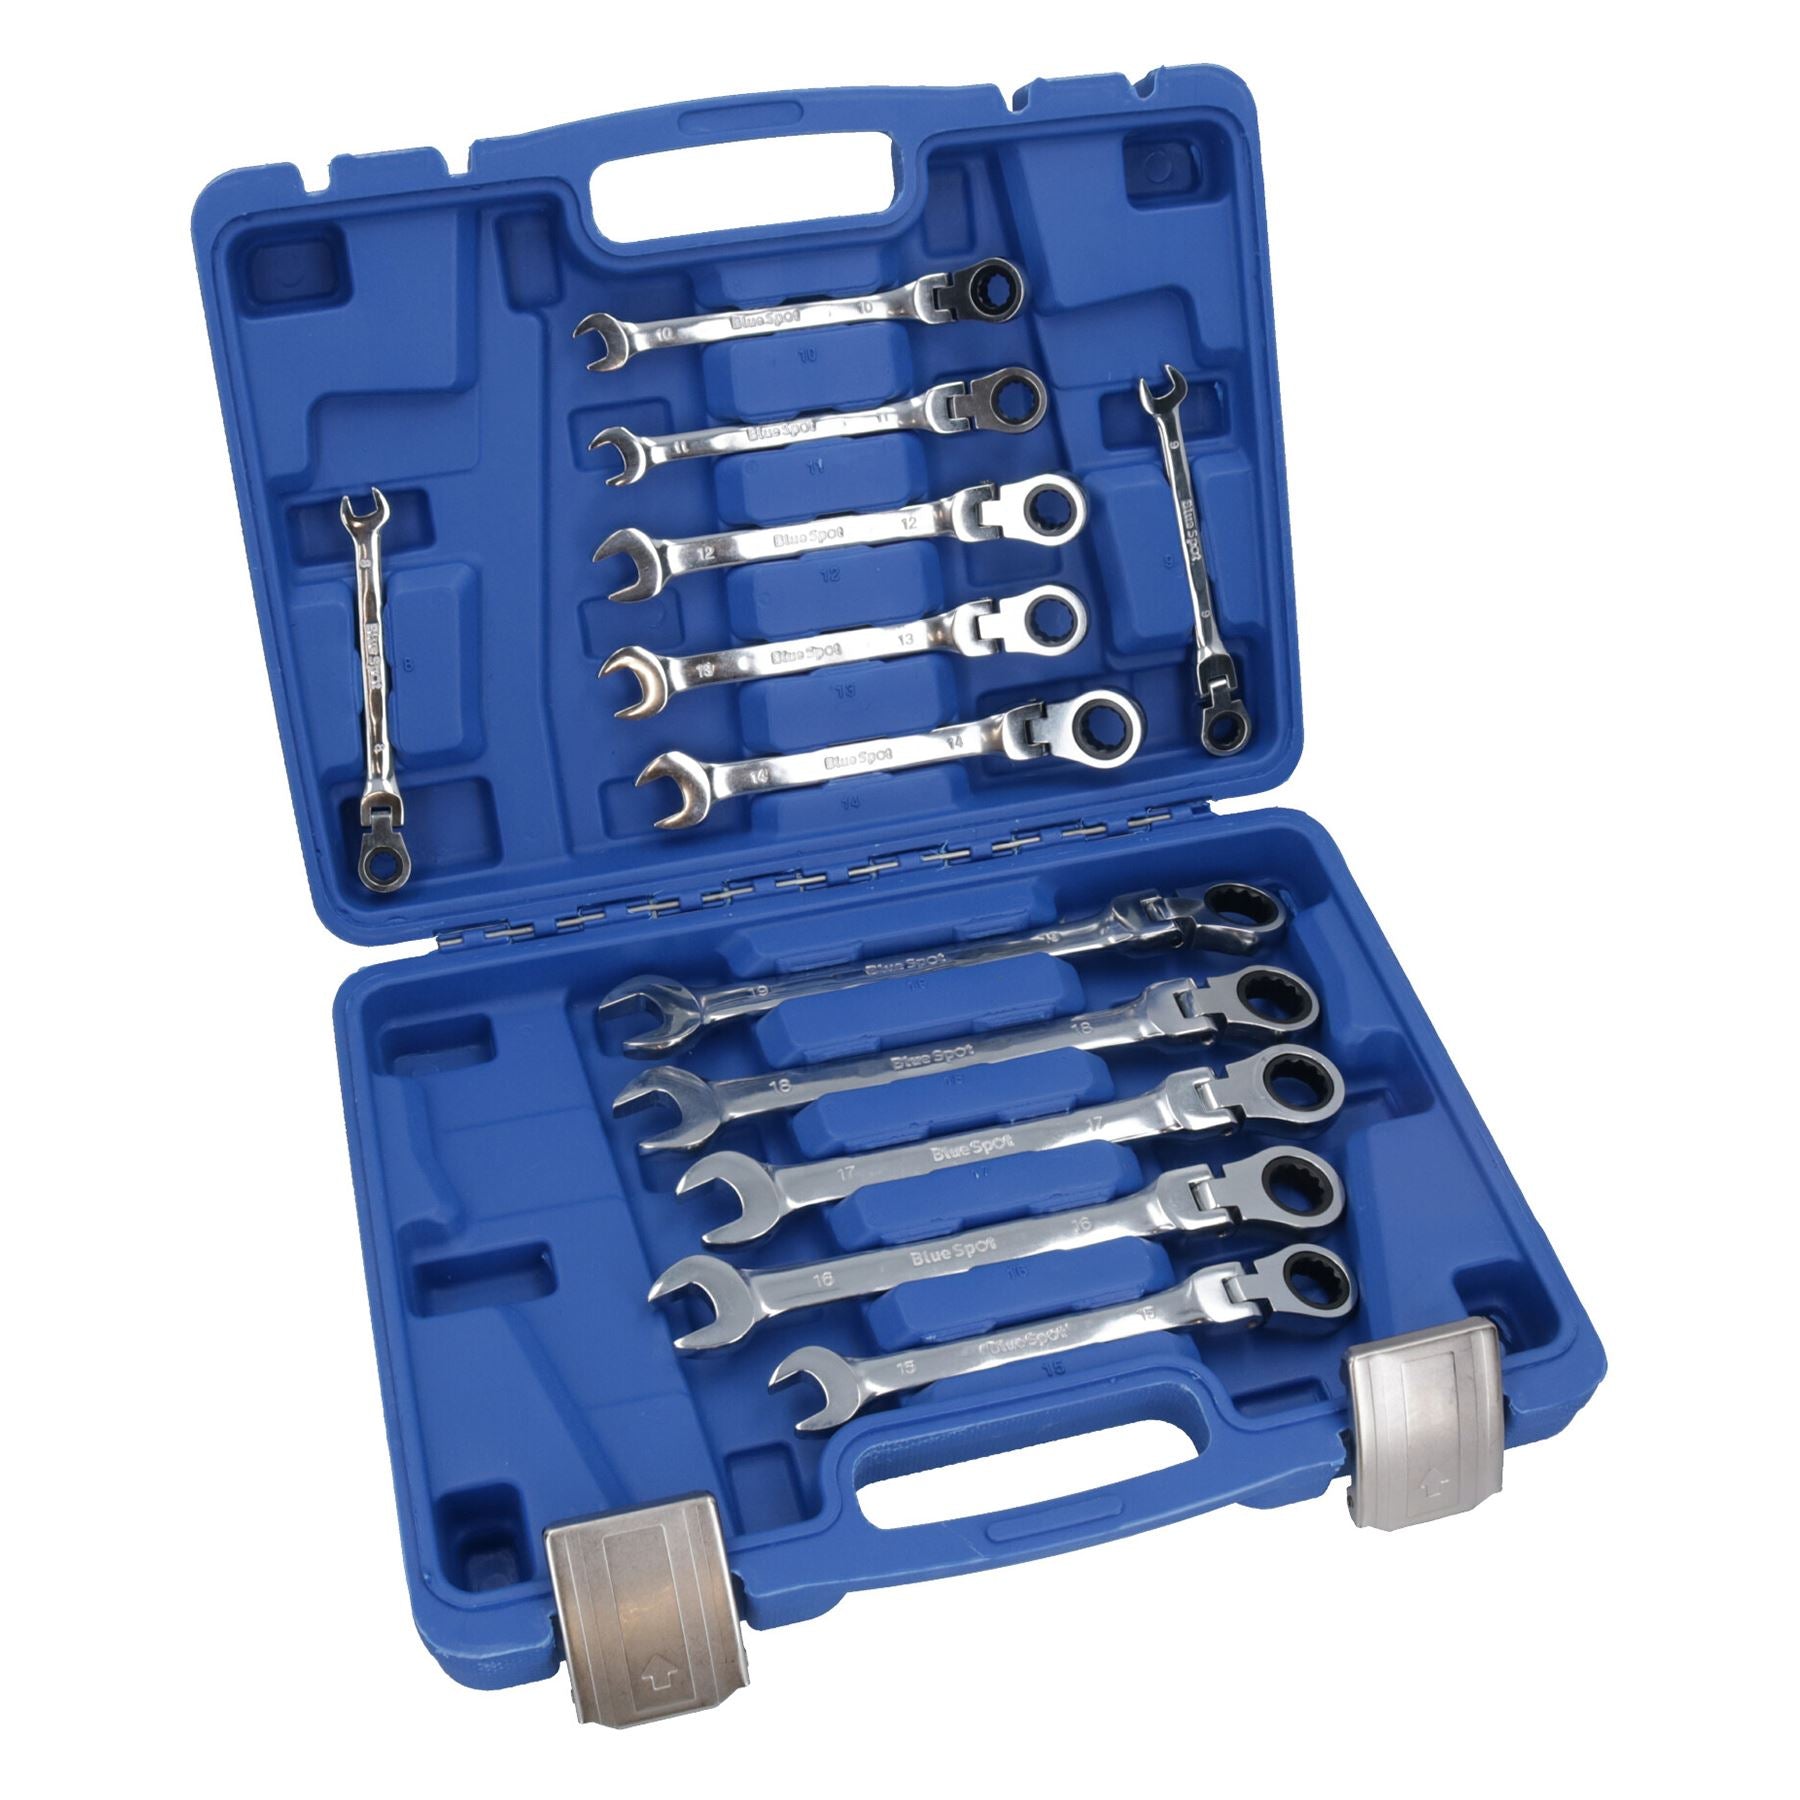 Metric MM Flexible Combination Ratchet Spanner Wrench Set 8mm – 19mm 12pc